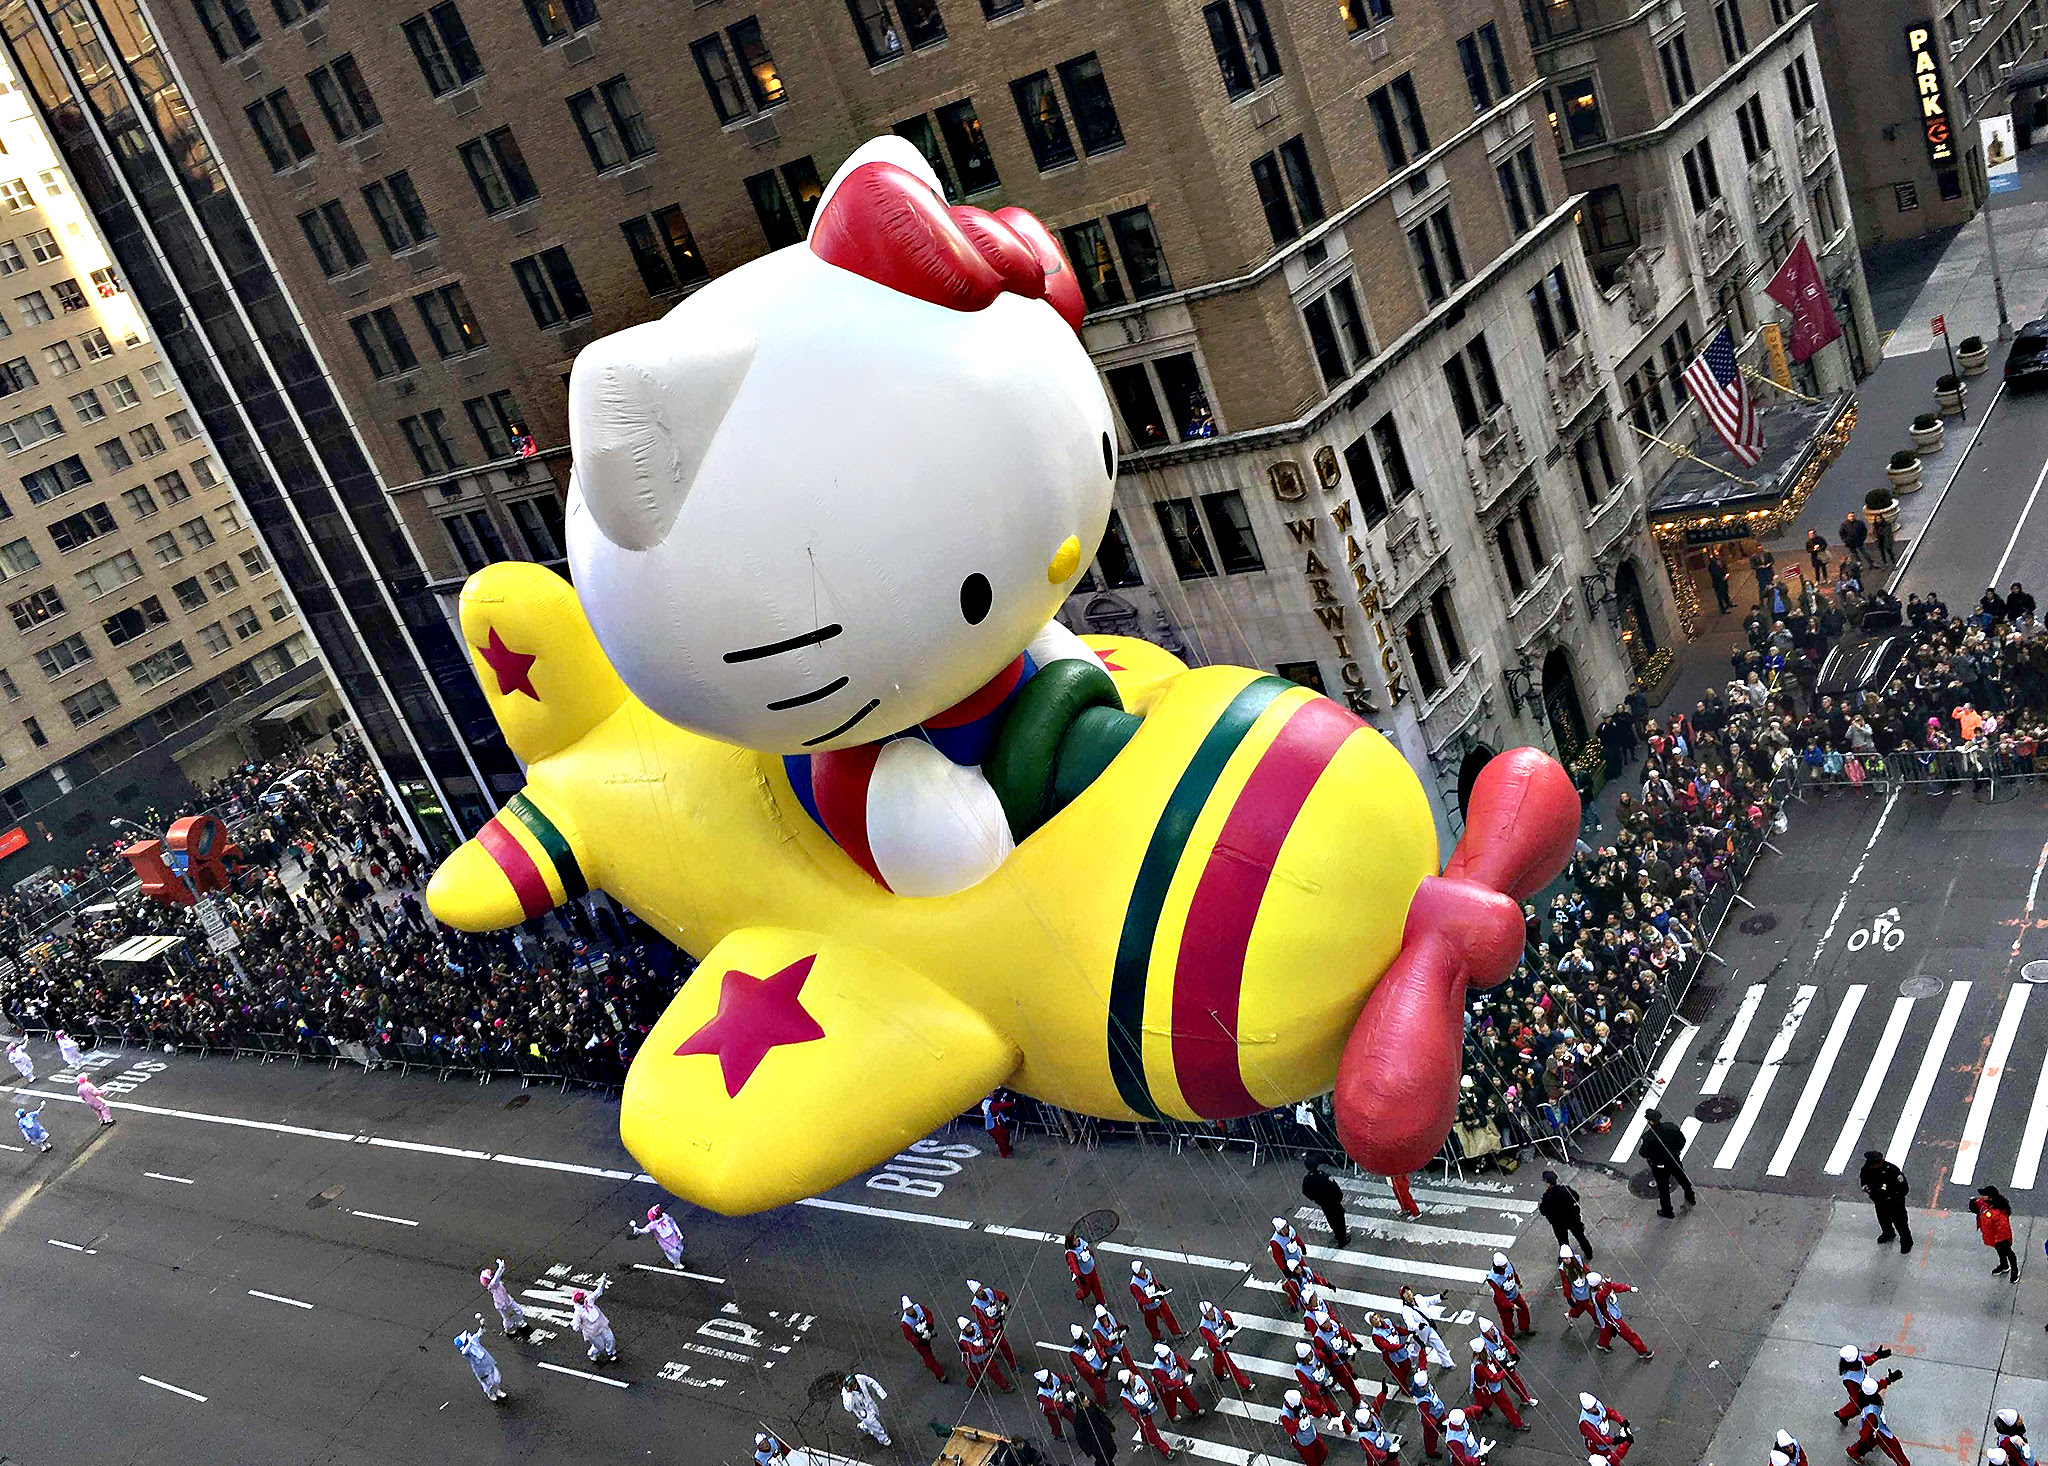 The "Hello Kitty" balloon proceeds high above spectators along 6th Ave during the 89th Macy's Thanksgiving Day Parade in the Manhattan borough of New York...The "Hello Kitty" balloon proceeds high above spectators along 6th Ave during the 89th Macy's Thanksgiving Day Parade in the Manhattan borough of New York November 26, 2015.